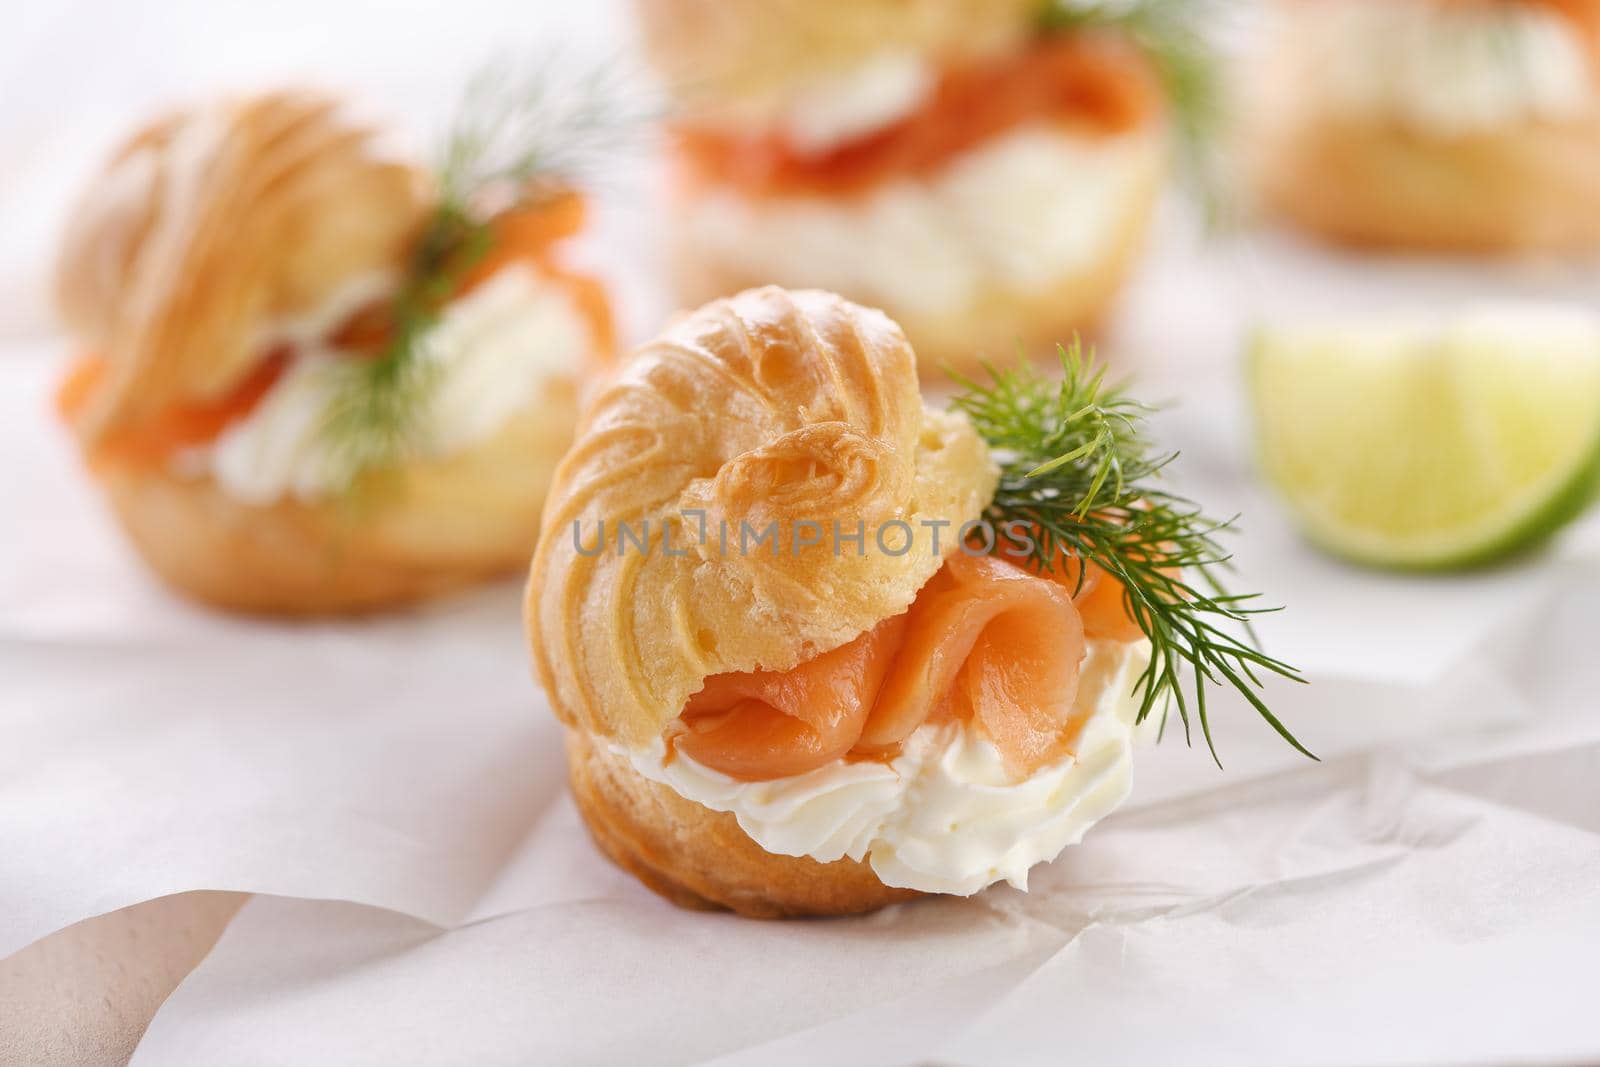 Profiteroles stuffed with cream cheese and salmon.